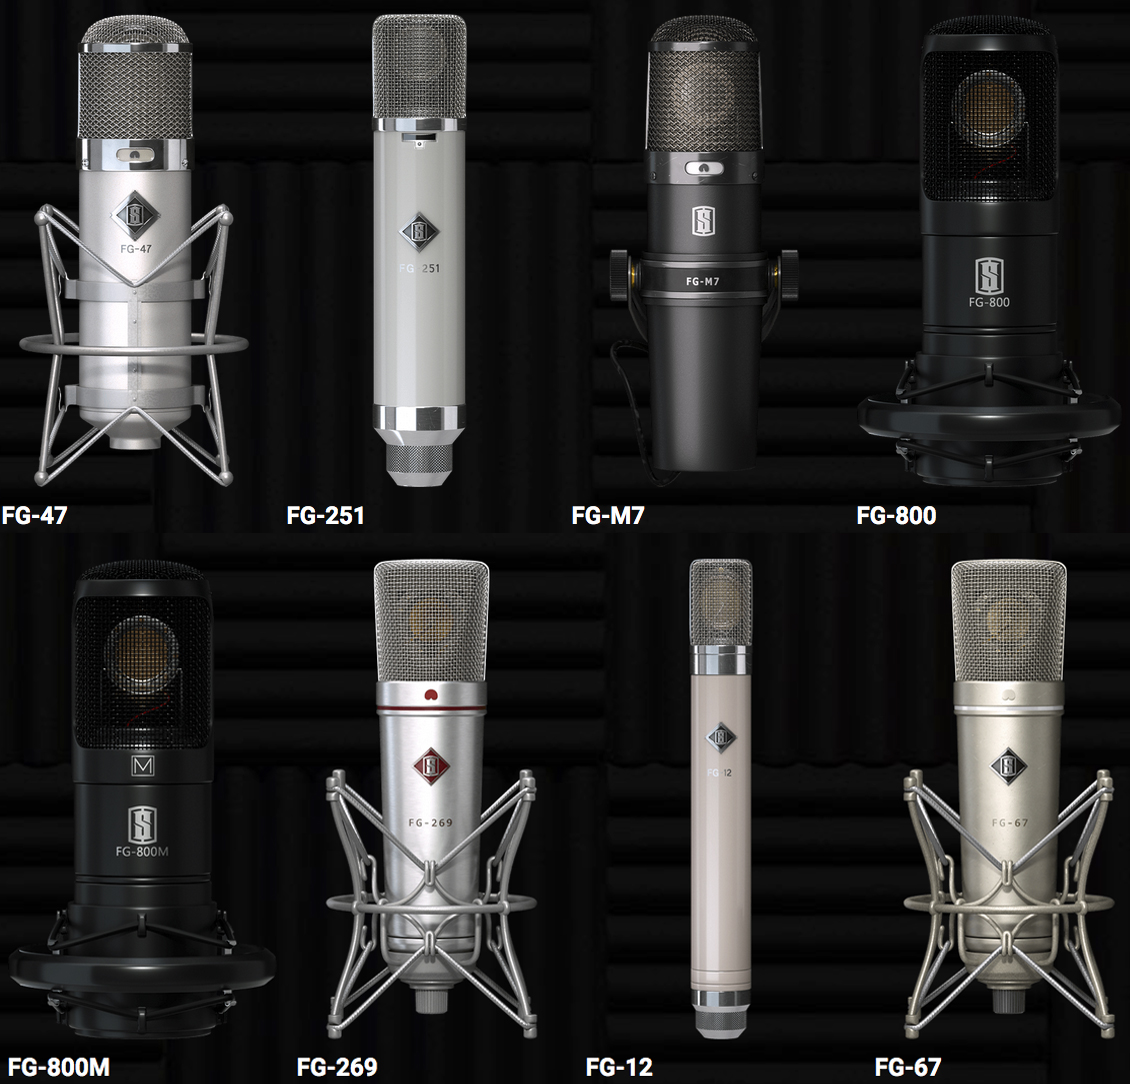 image of the models of microphone that the Slate Digital VMS ML-1 Modeling Microphone models